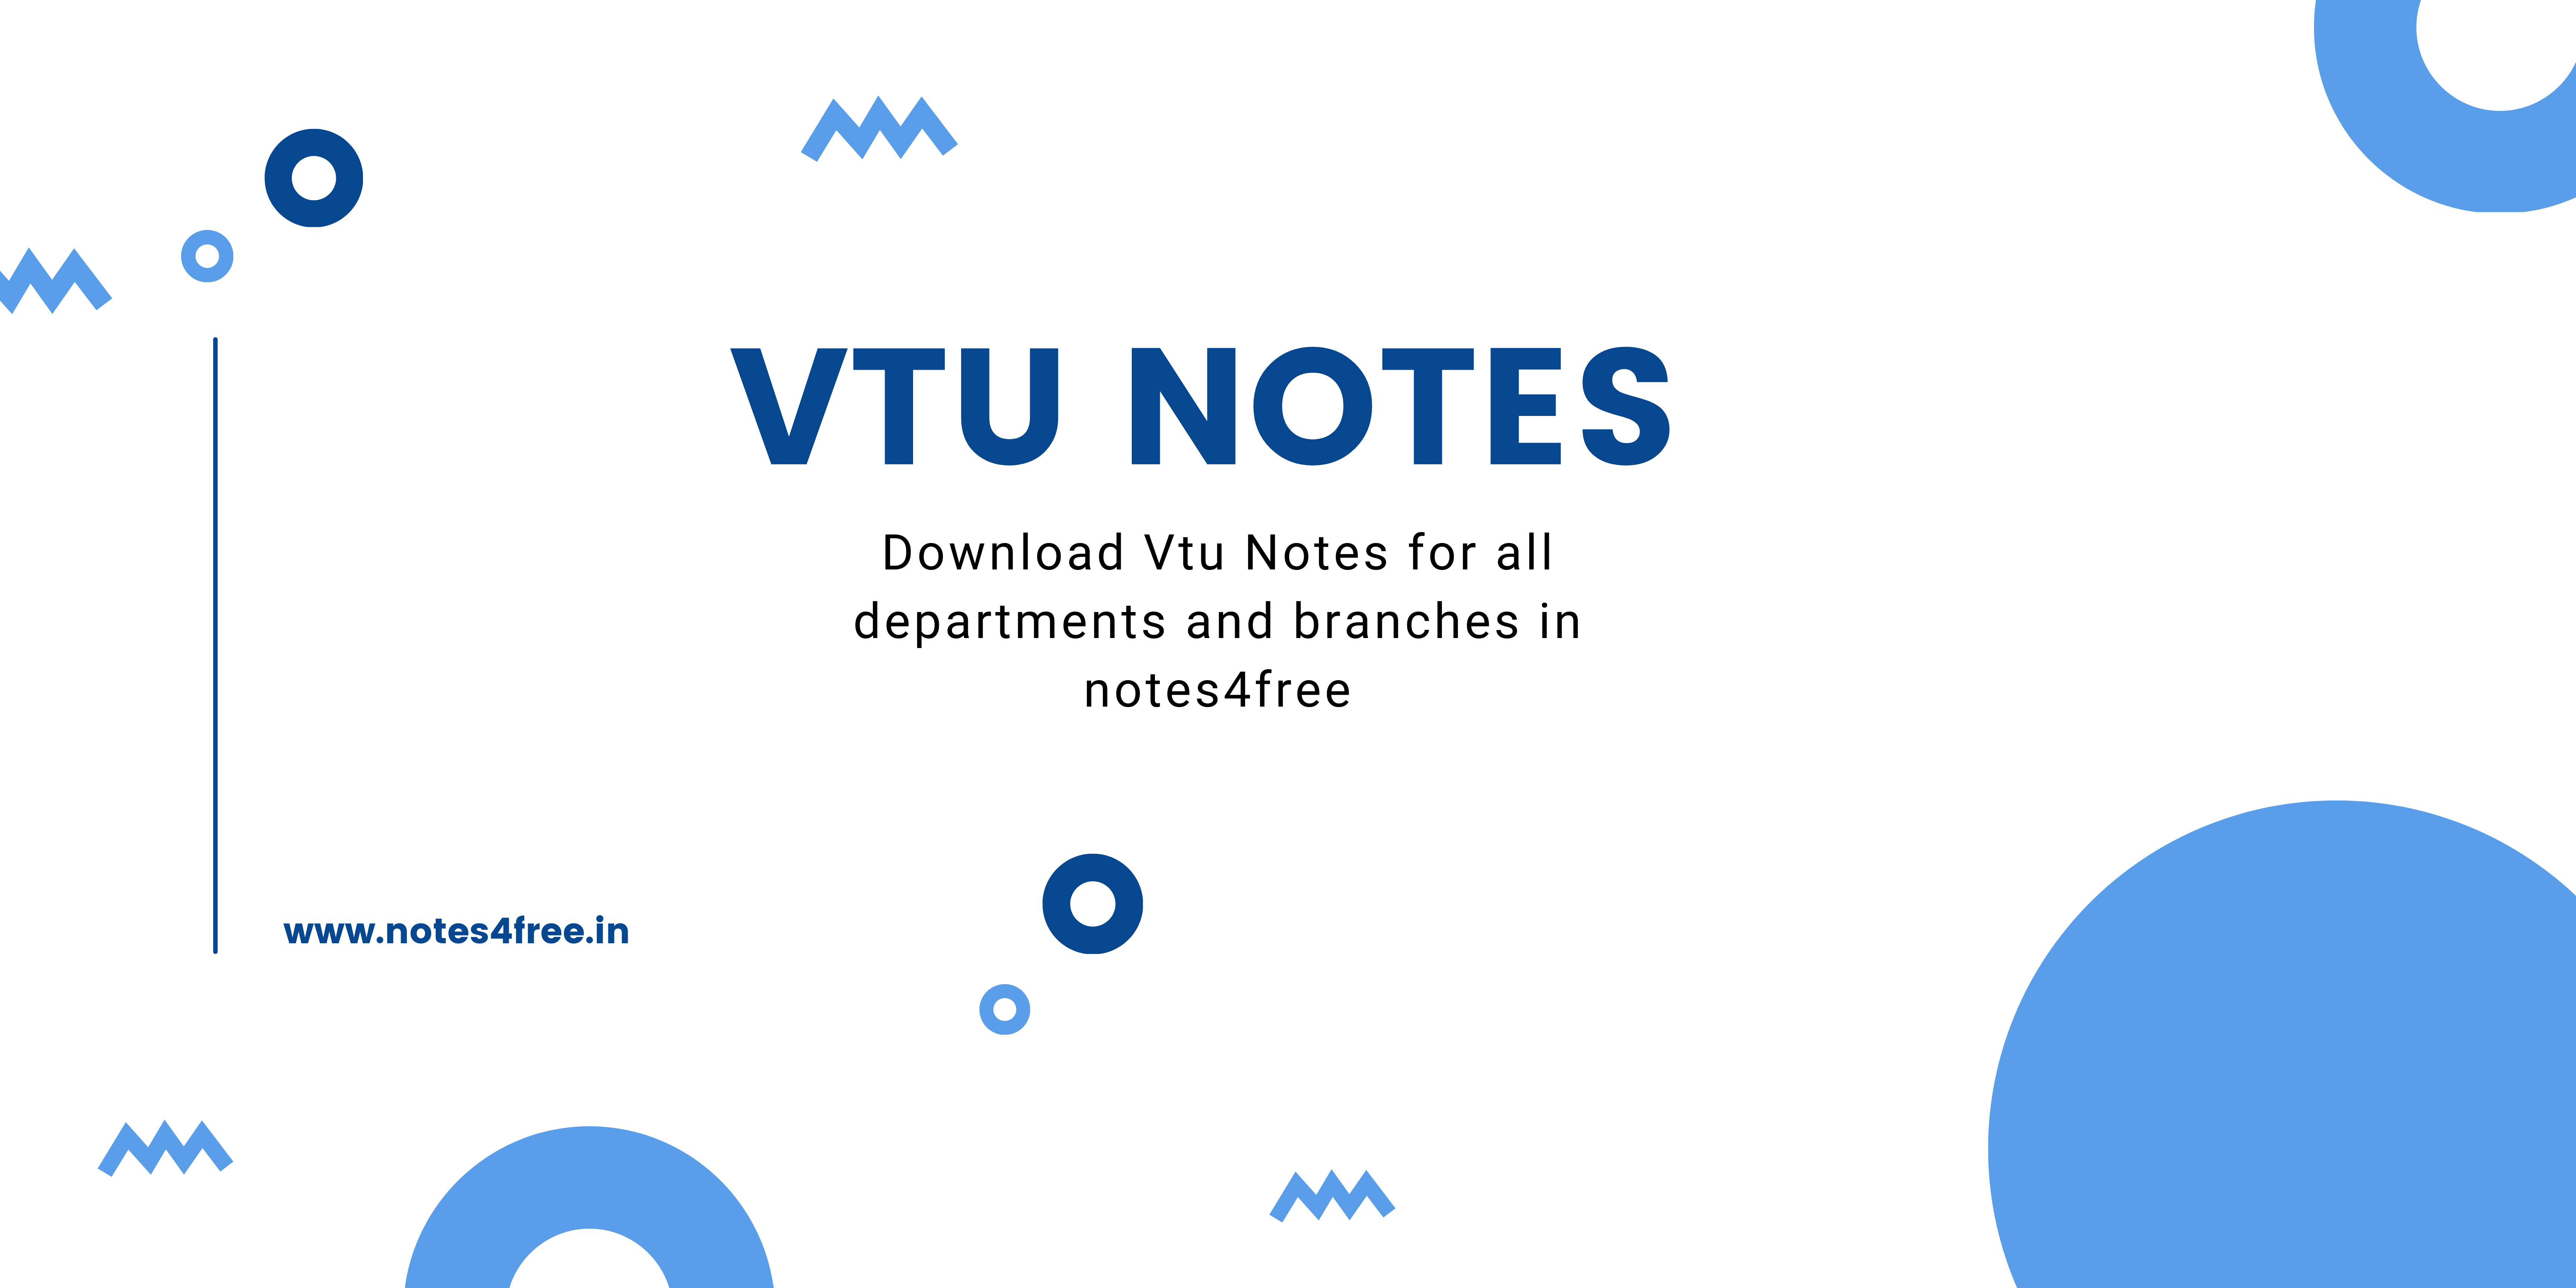  vtu university notes on
        1st SEM        Computer science and Engineerings notes 